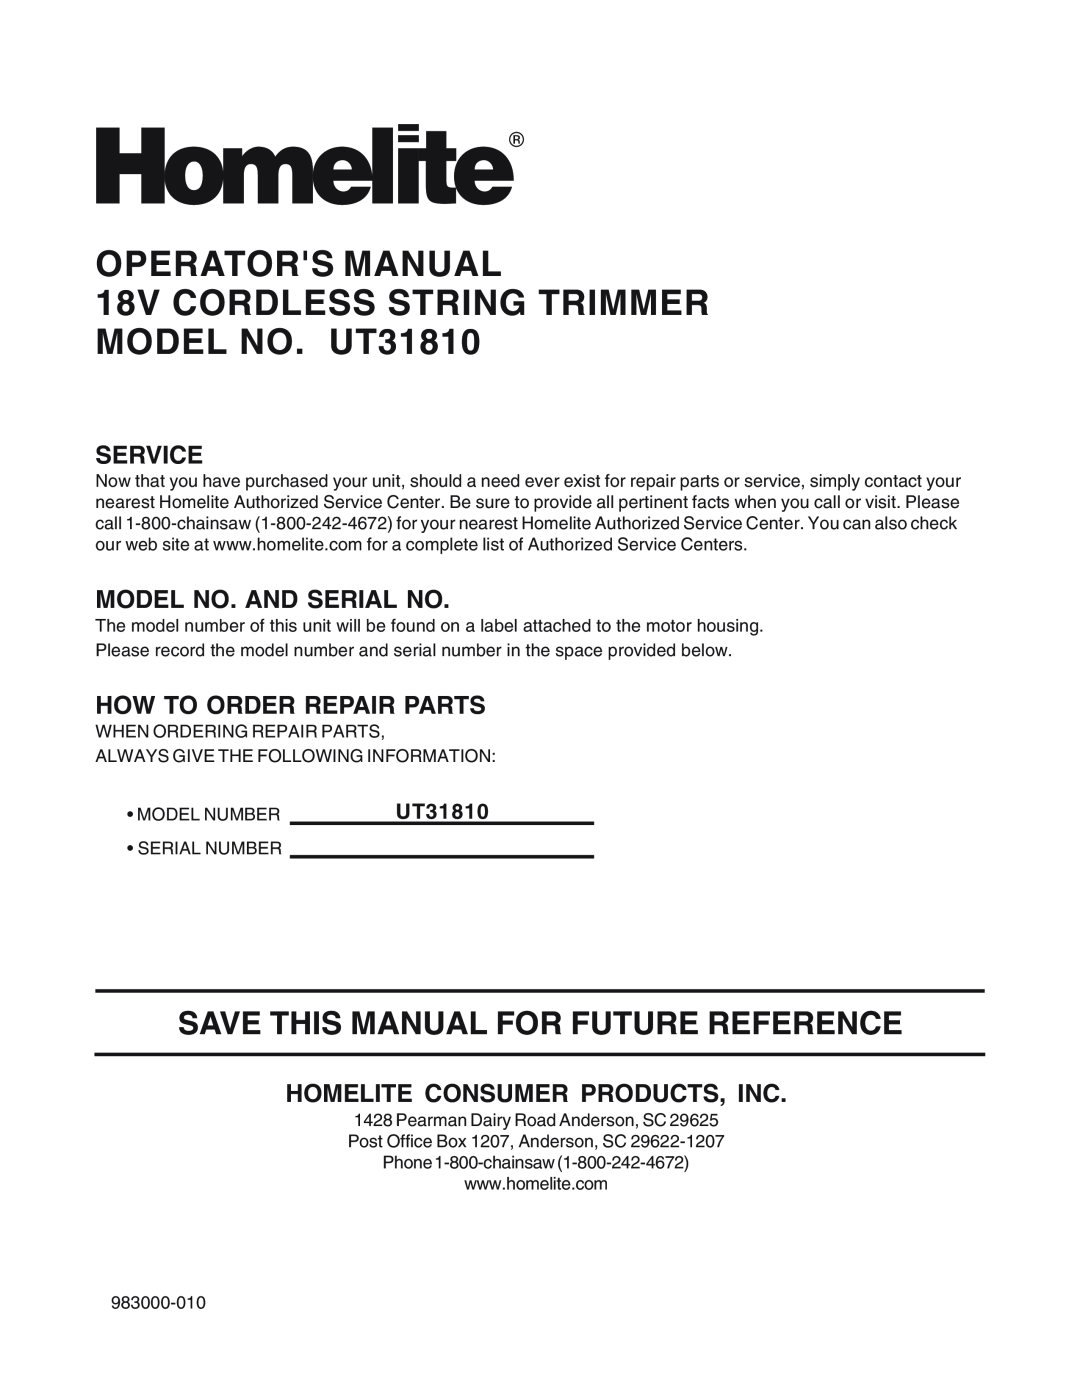 Homelite UT31810 manual Service, Model No. And Serial No, How To Order Repair Parts, Homelite Consumer Products, Inc 